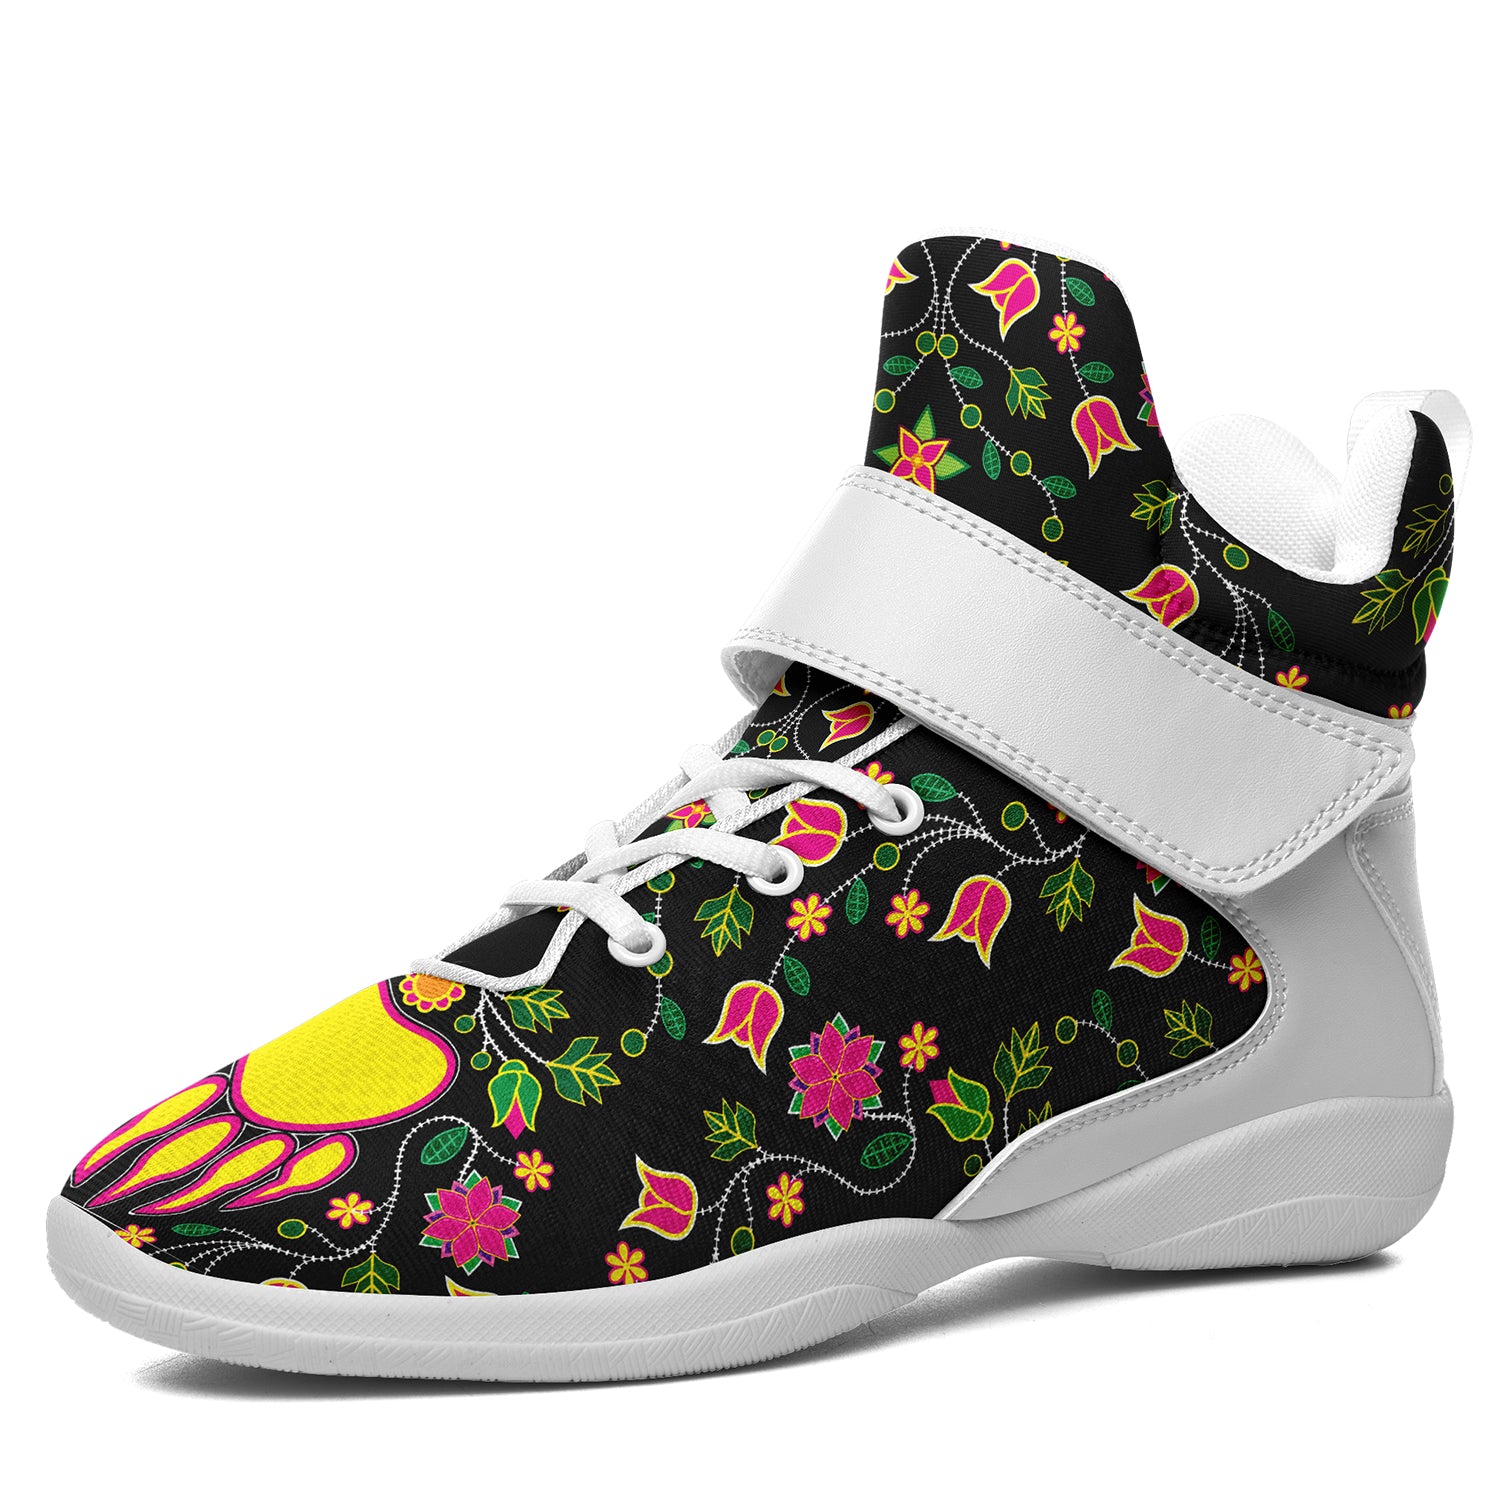 Floral Bearpaw Kid's Ipottaa Basketball / Sport High Top Shoes